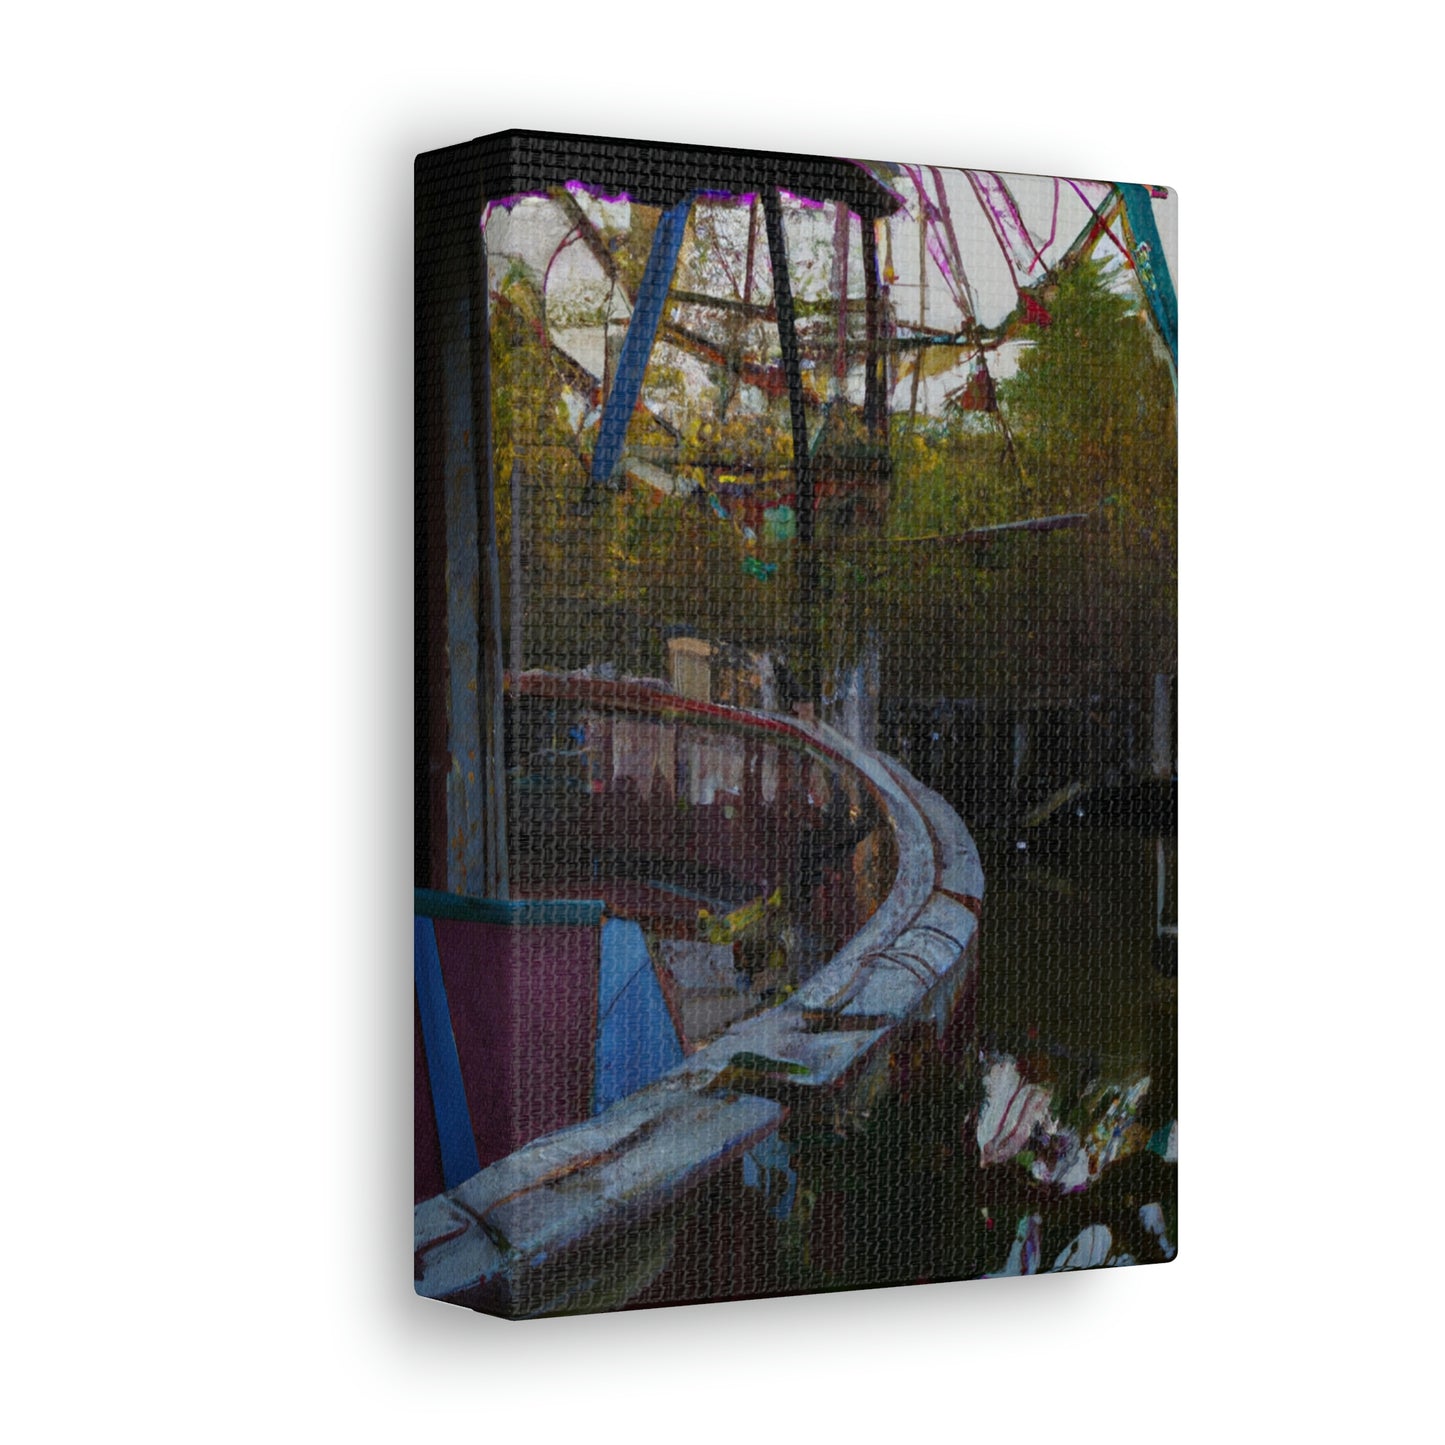 "Lost in the Funhouse: Exploring the Abandoned Amusement Park" - The Alien Canva